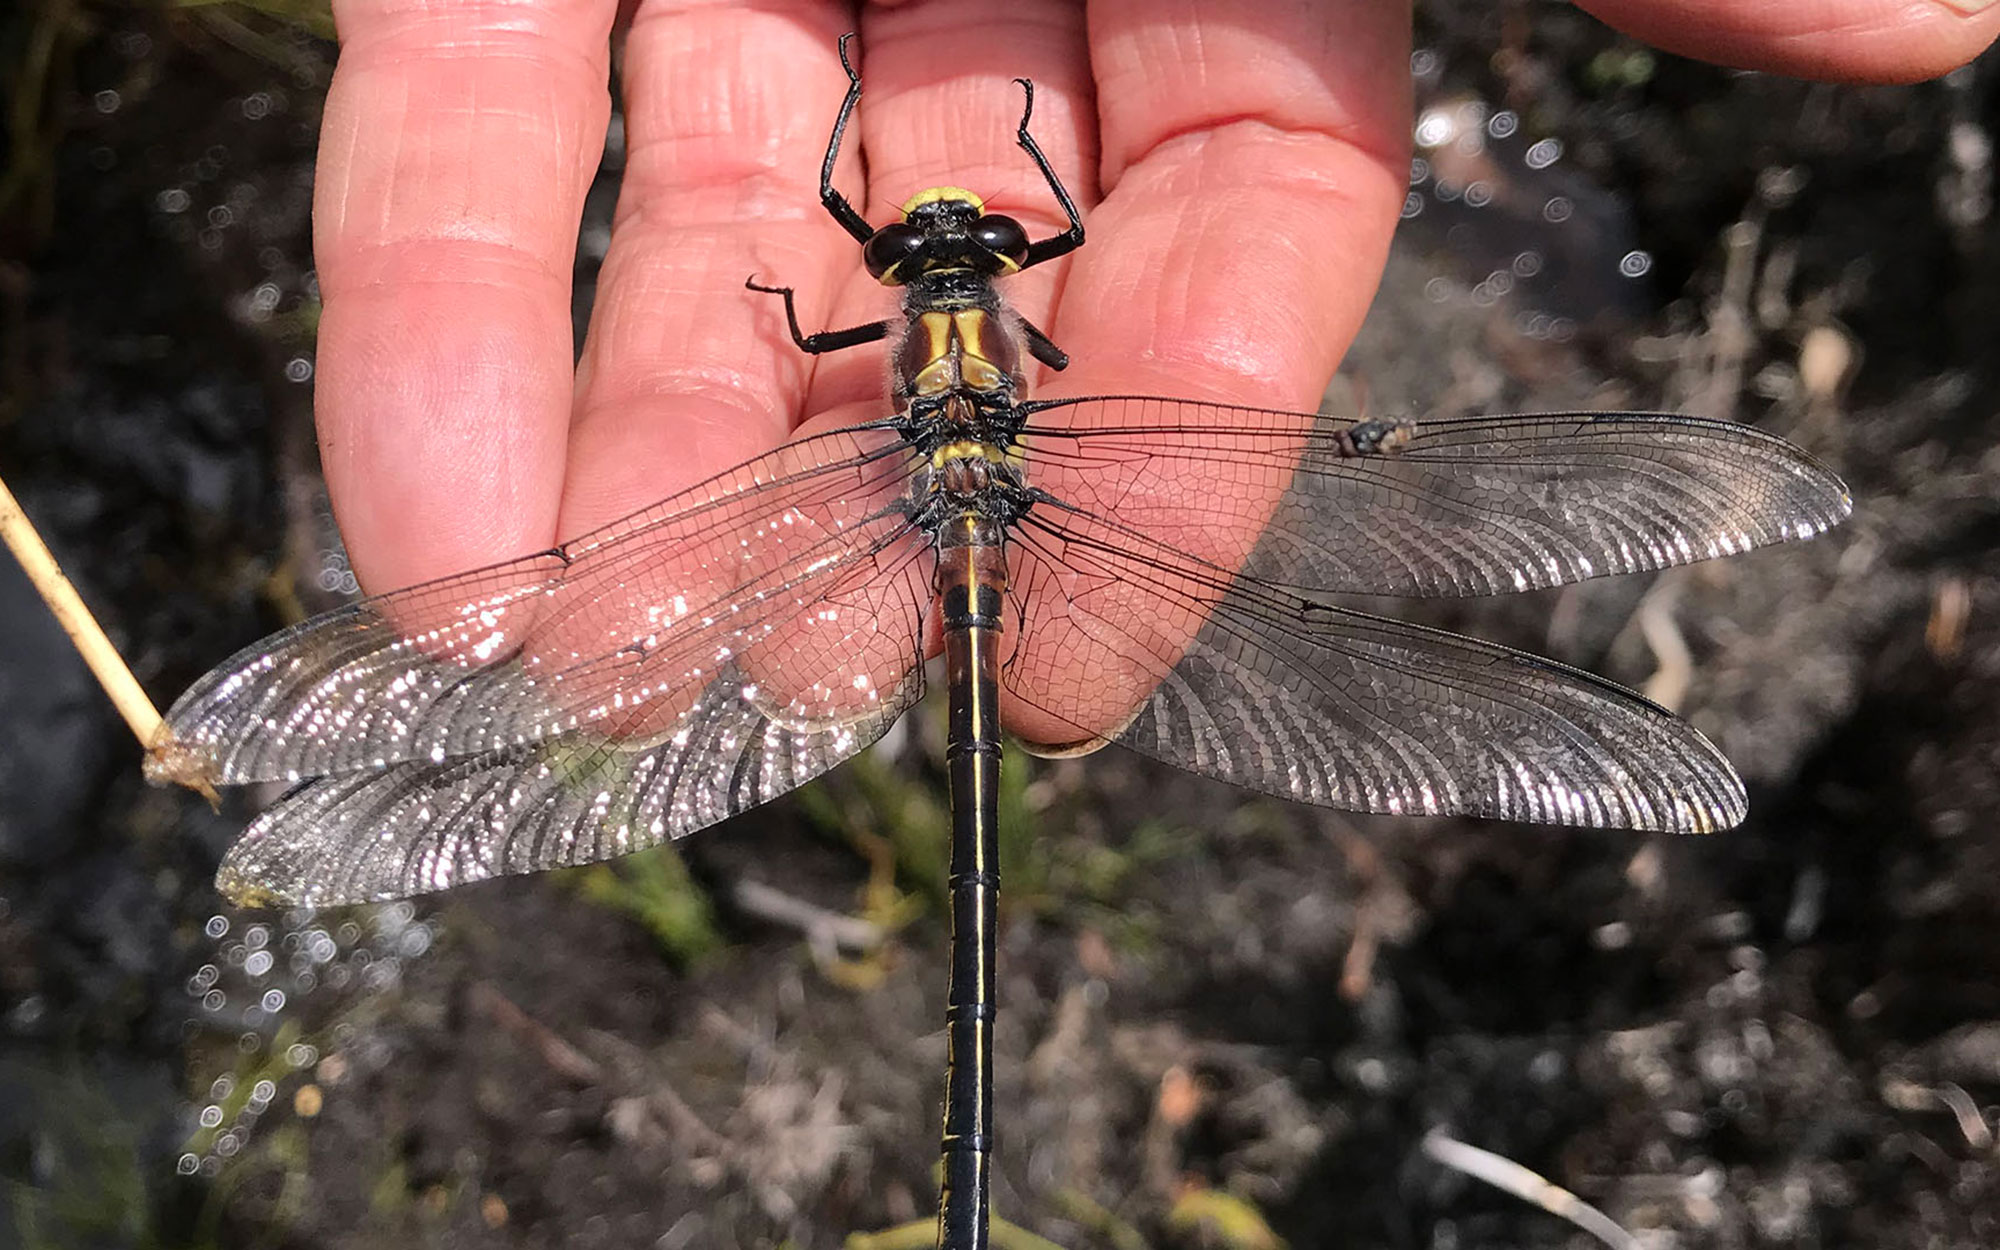 Male giant dragonfly on hand